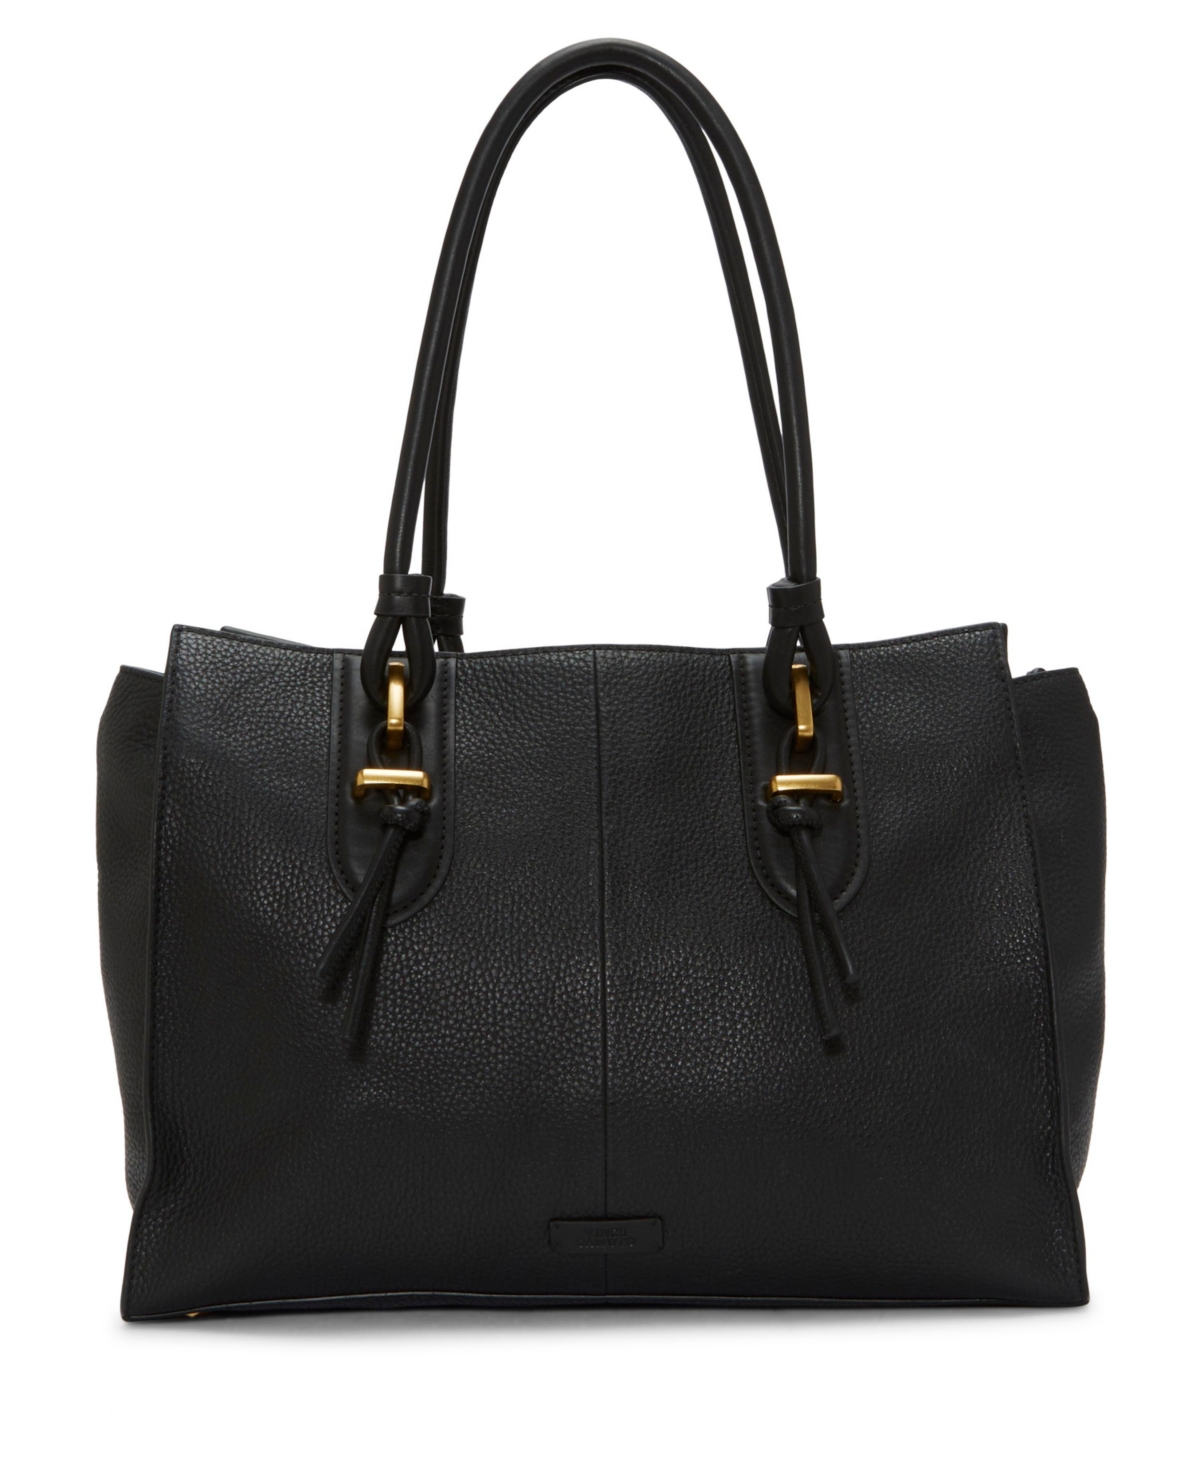 Vince Camuto Women's Maecy Tote In Black